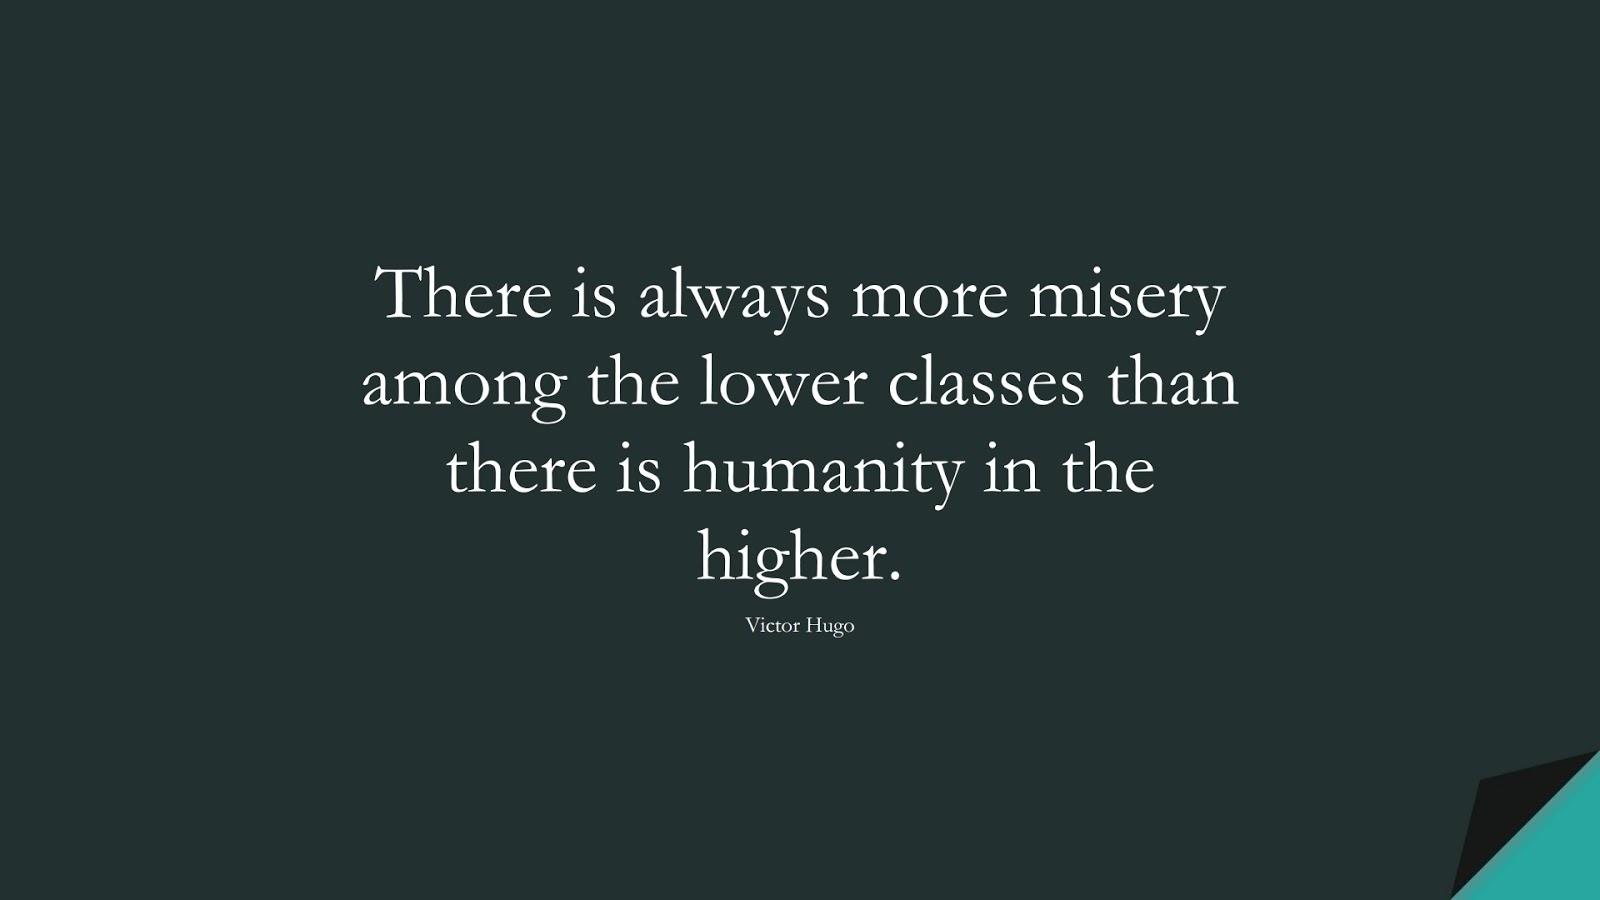 There is always more misery among the lower classes than there is humanity in the higher. (Victor Hugo);  #HumanityQuotes